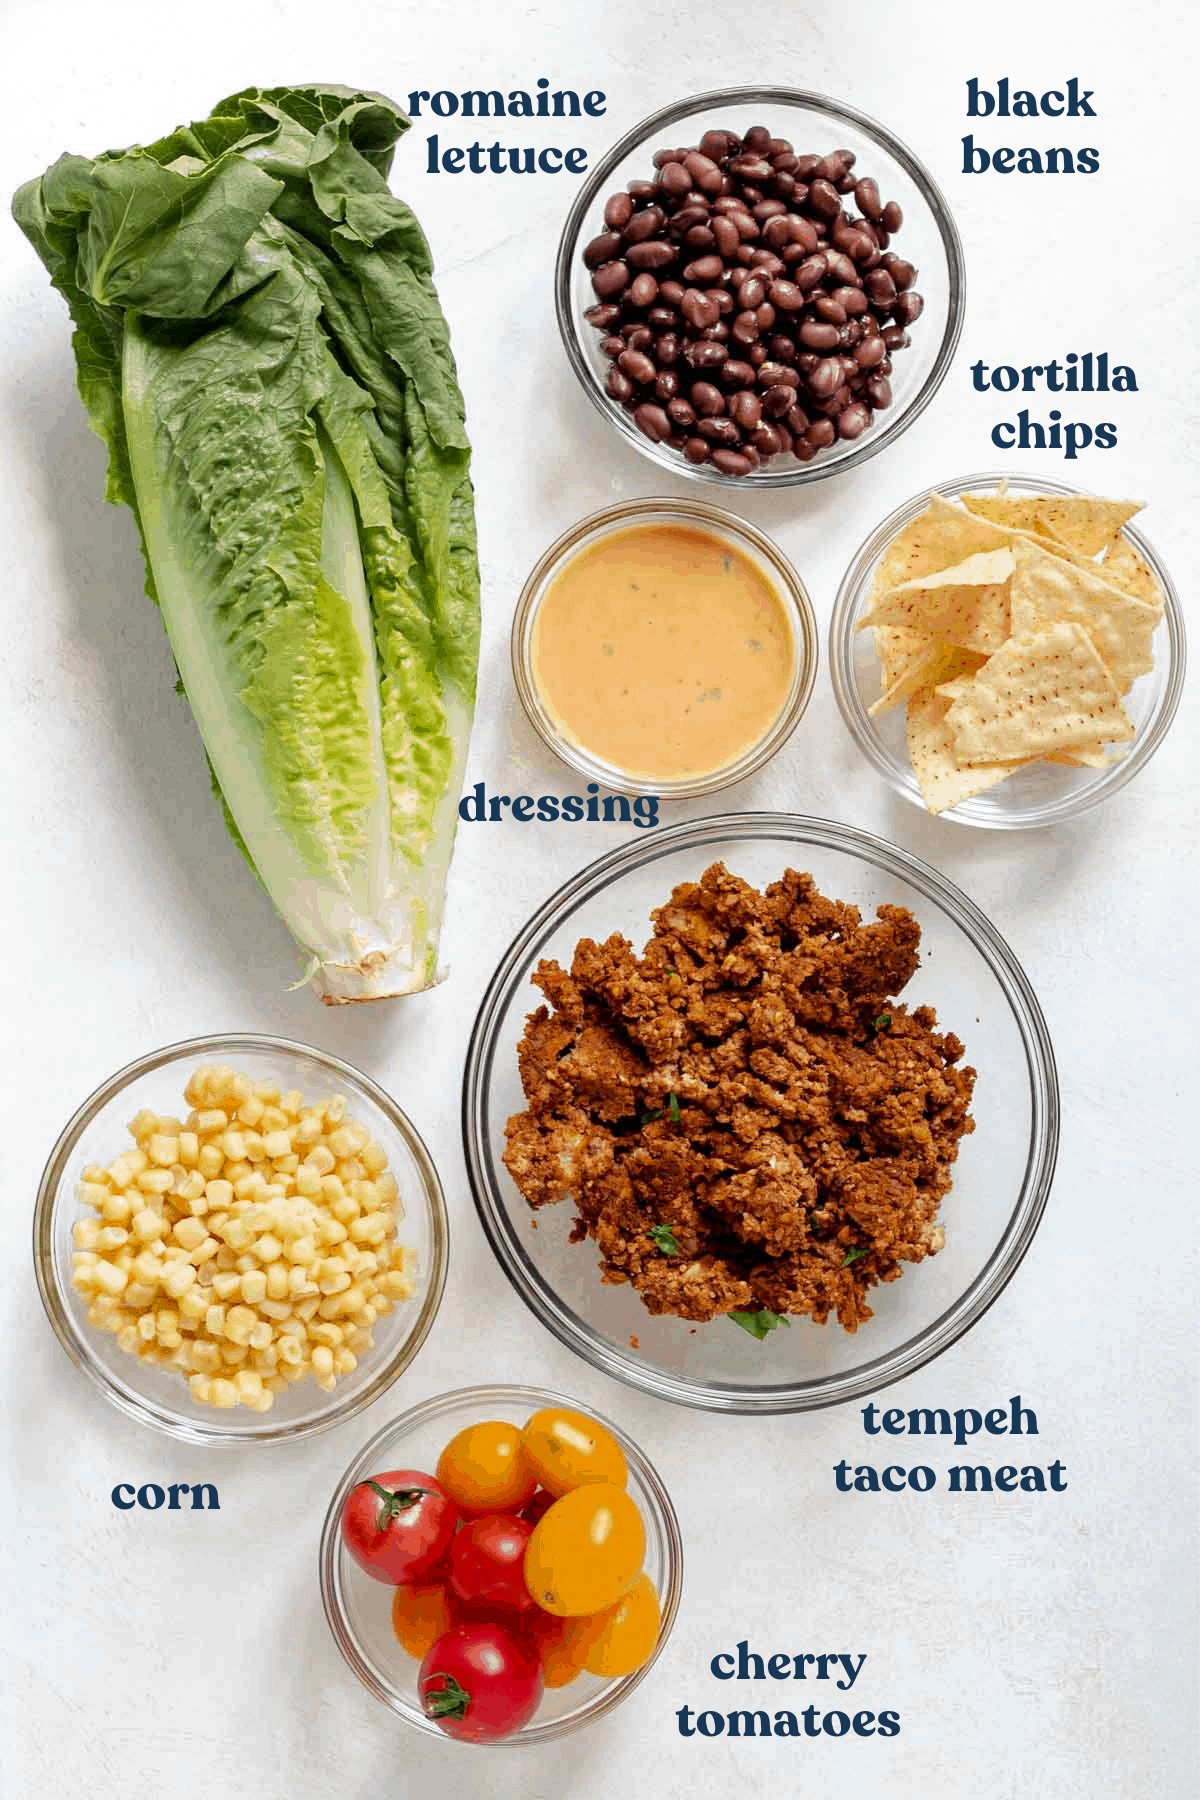 Black beans, romaine lettuce, tortilla chips, dressing, taco meat, corn and tomatoes on white backdrop.